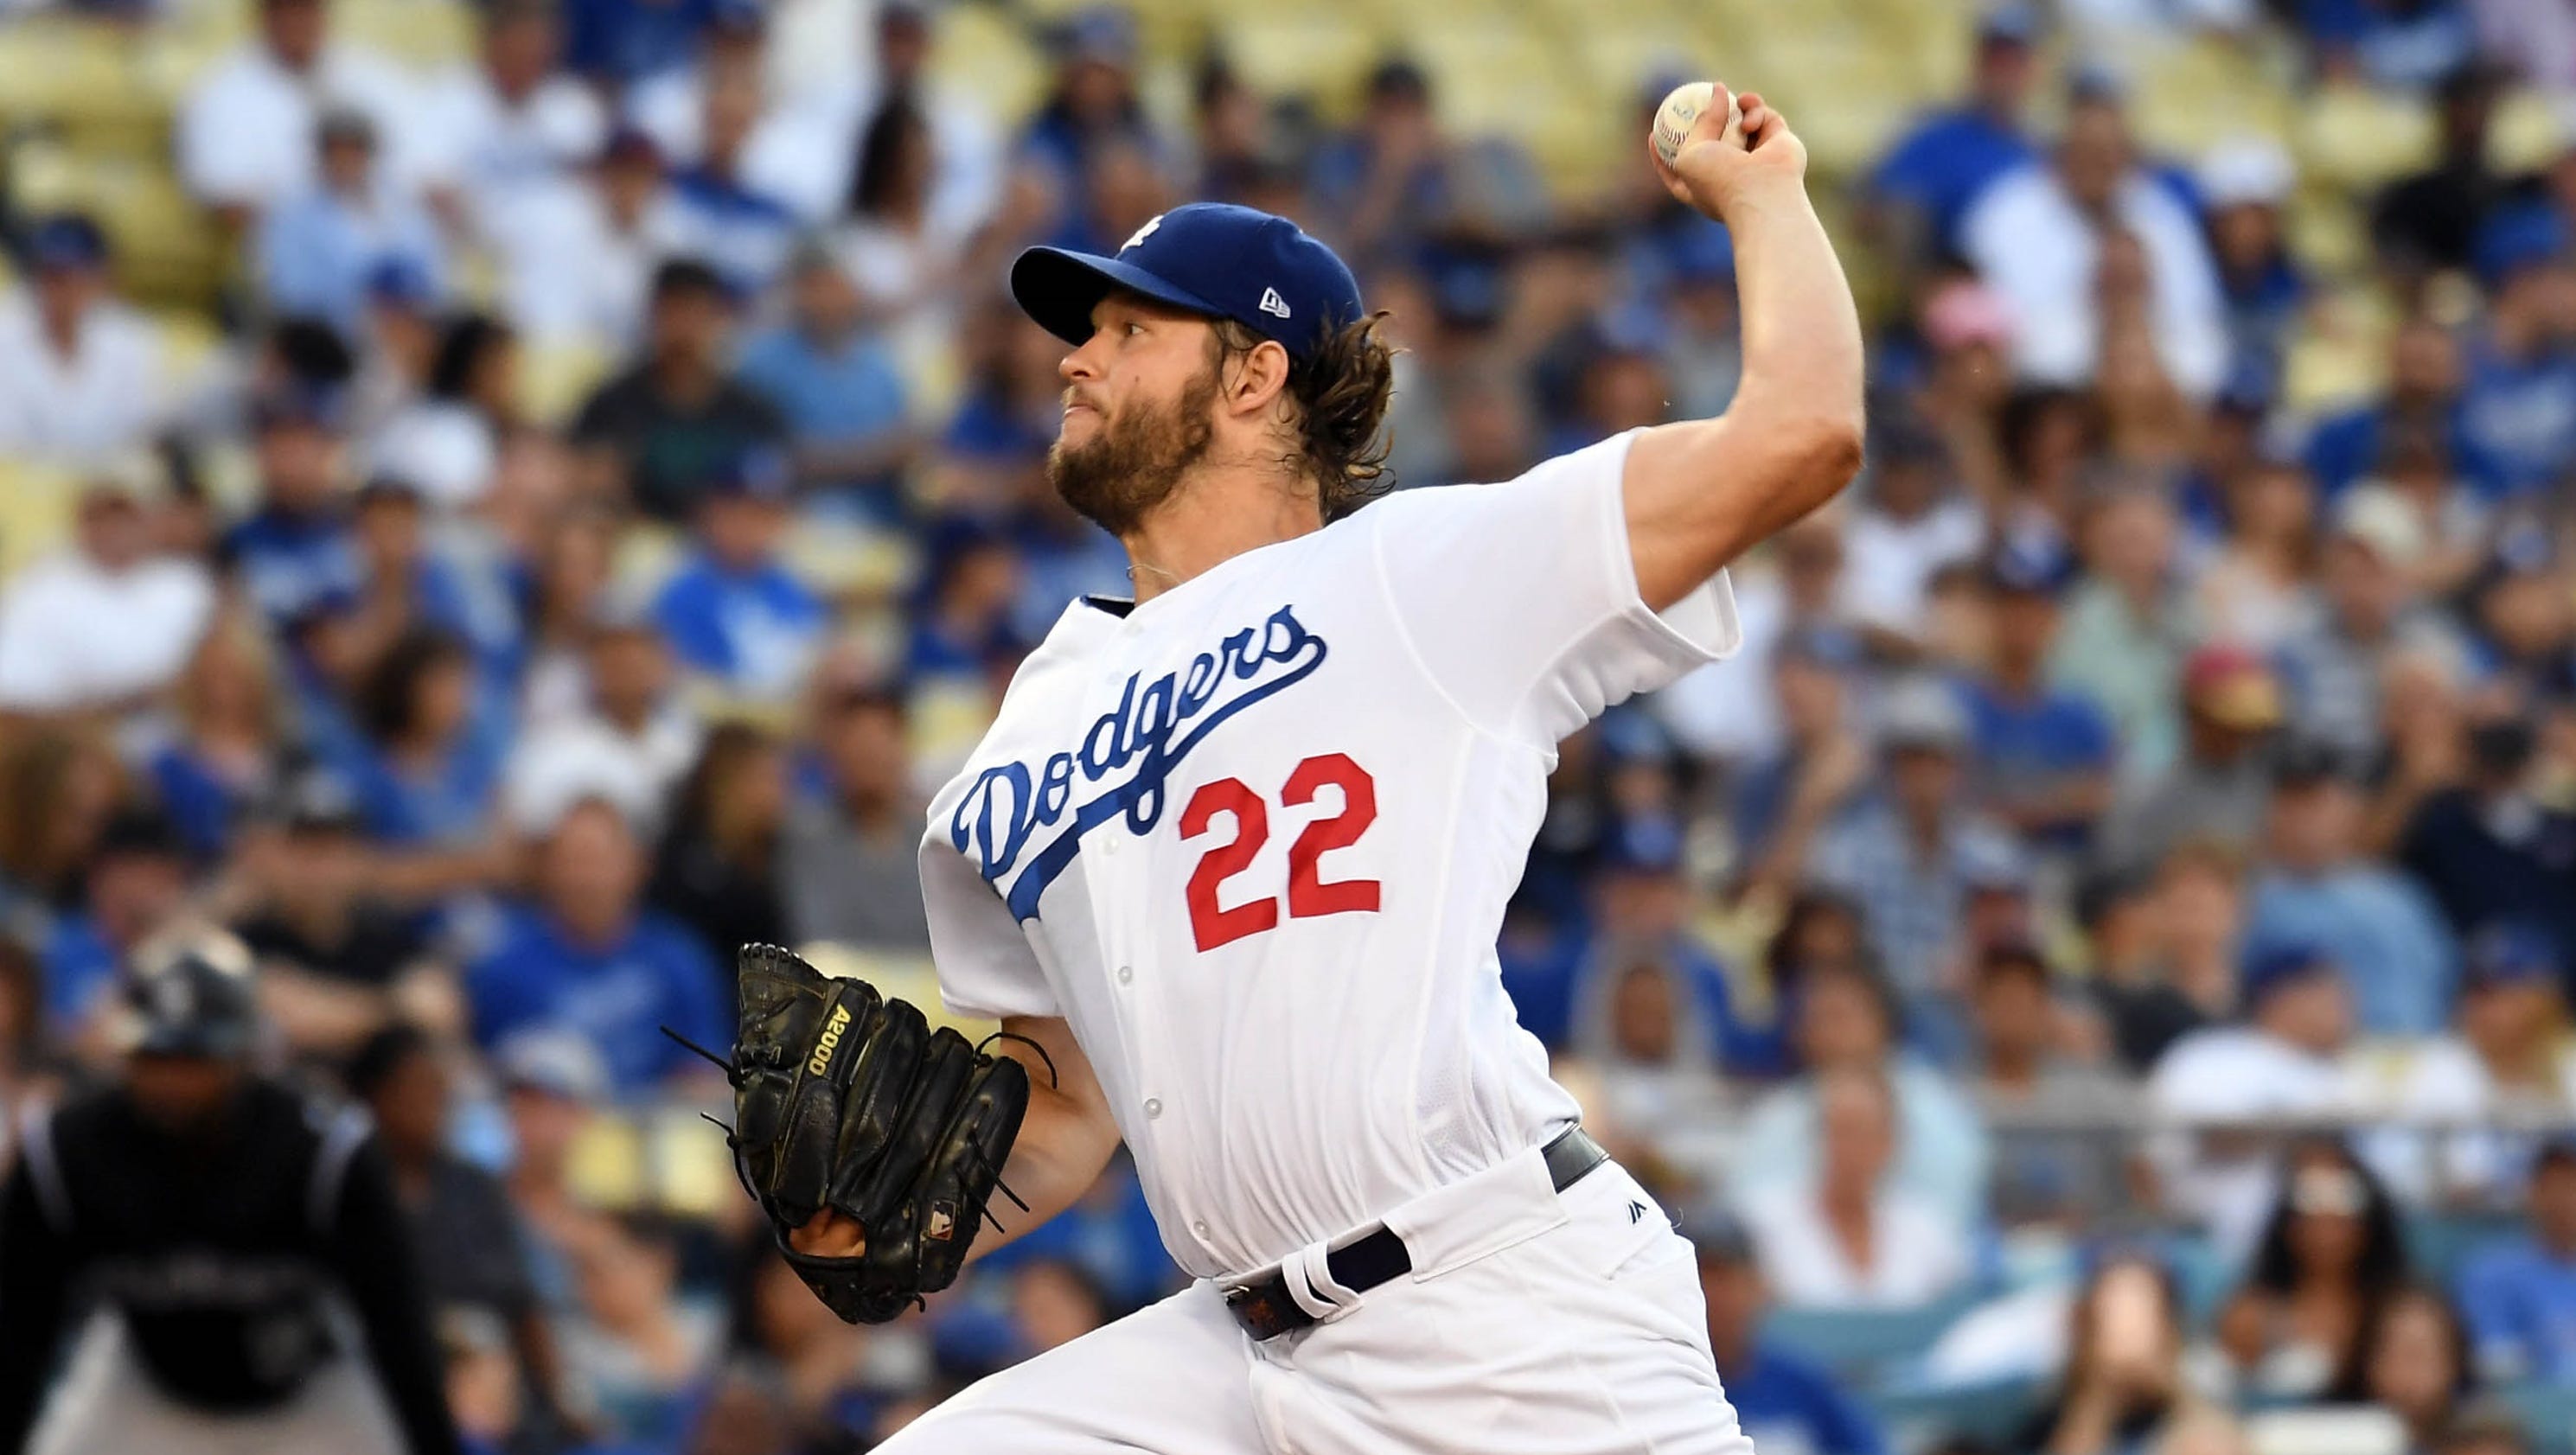 Clayton Kershaw, Dodgers shut out Rockies for ninth consecutive win